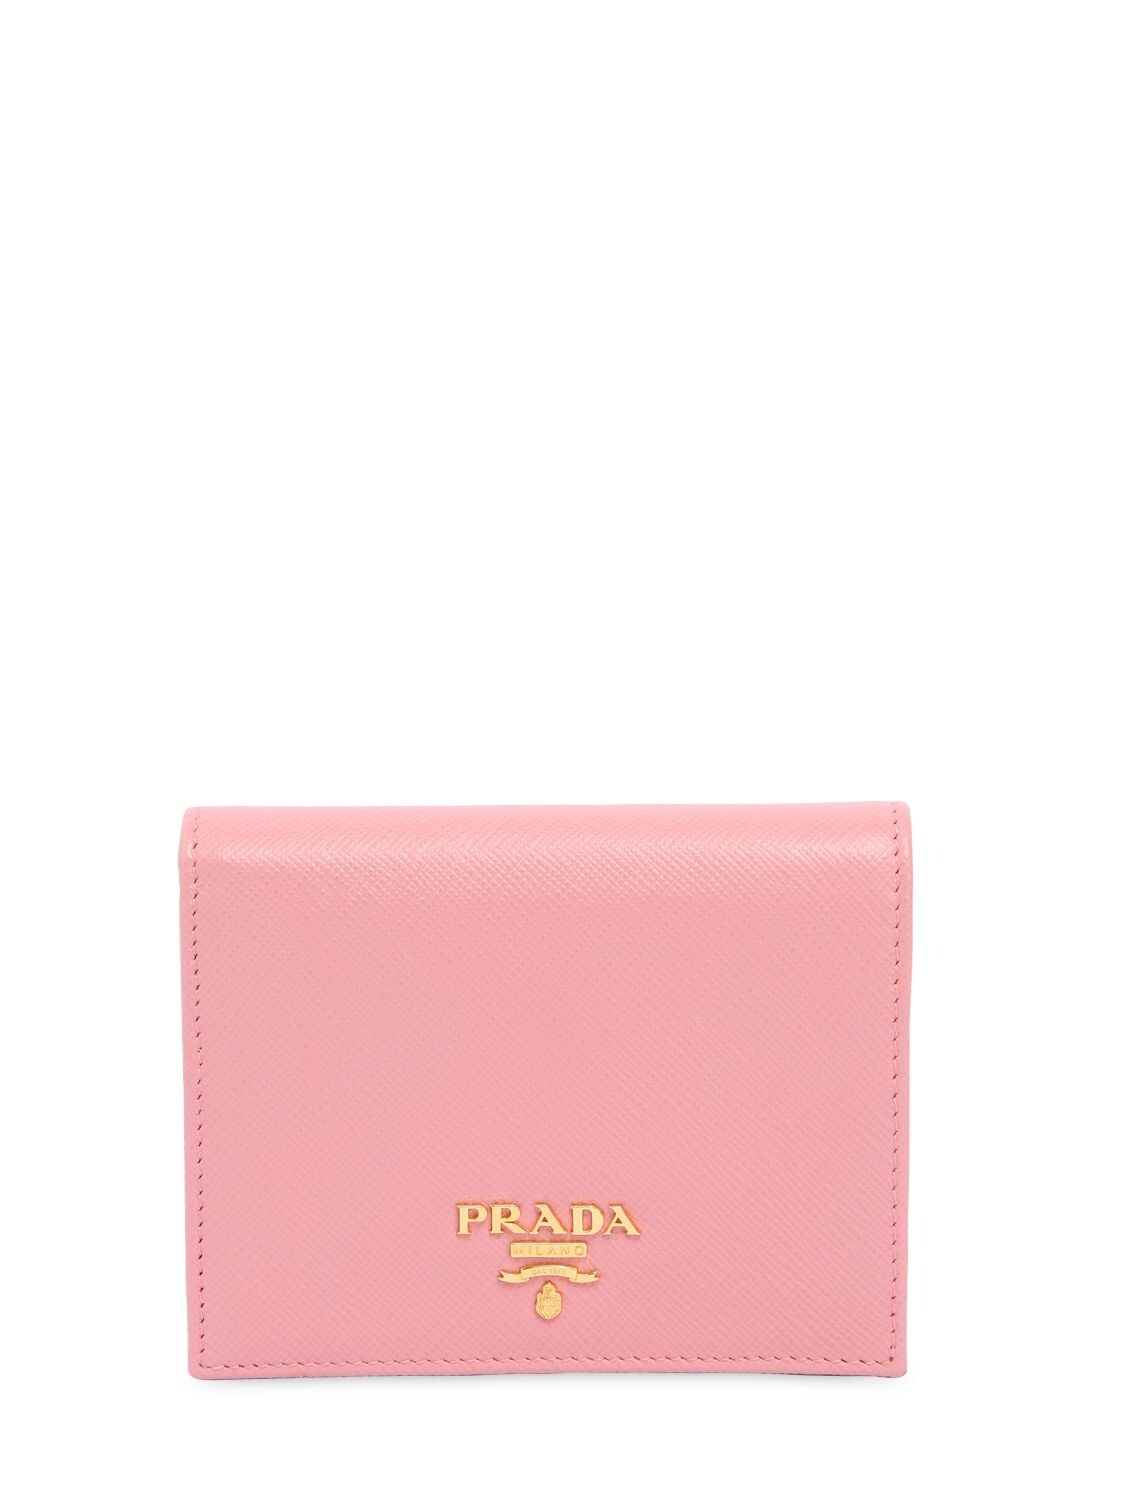 Prada Small Leather Wallet In Pink